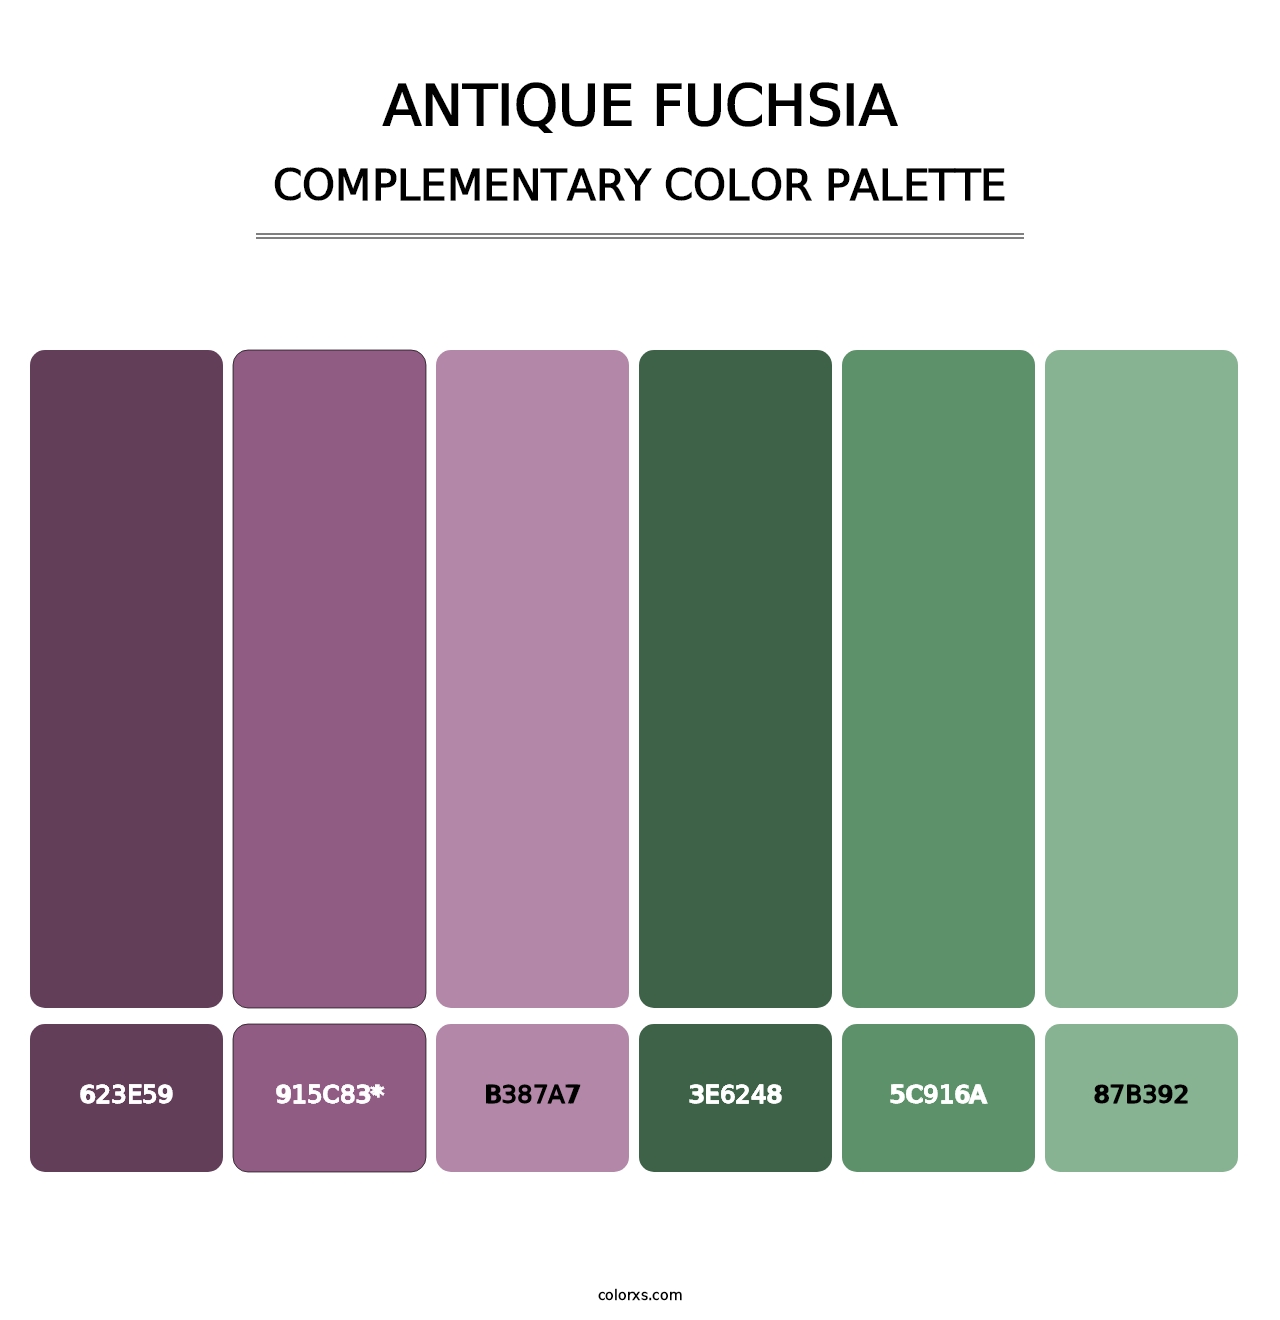 Antique Fuchsia - Complementary Color Palette